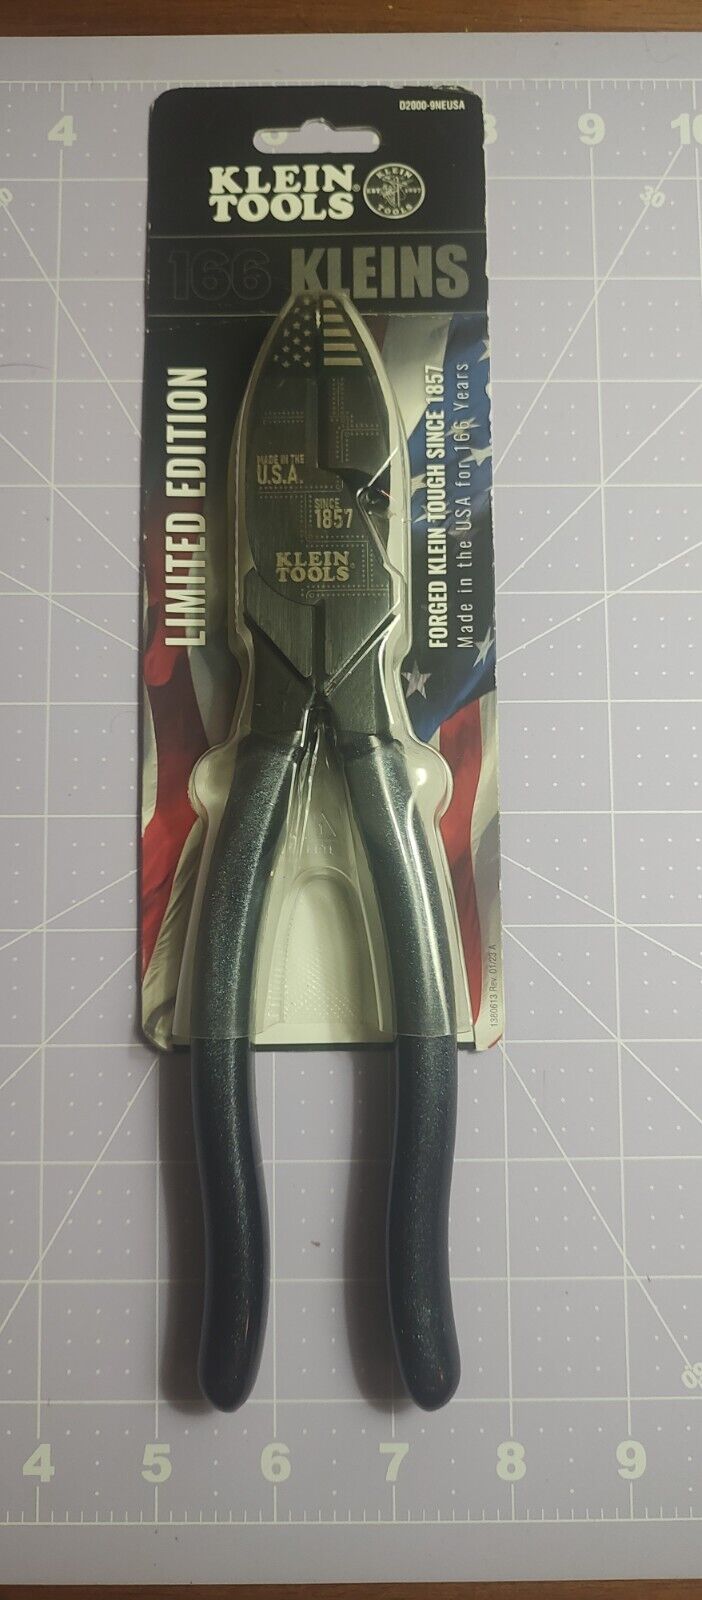 Klein Tools Limited Edition 166 Klein's Lineman Pliers / New